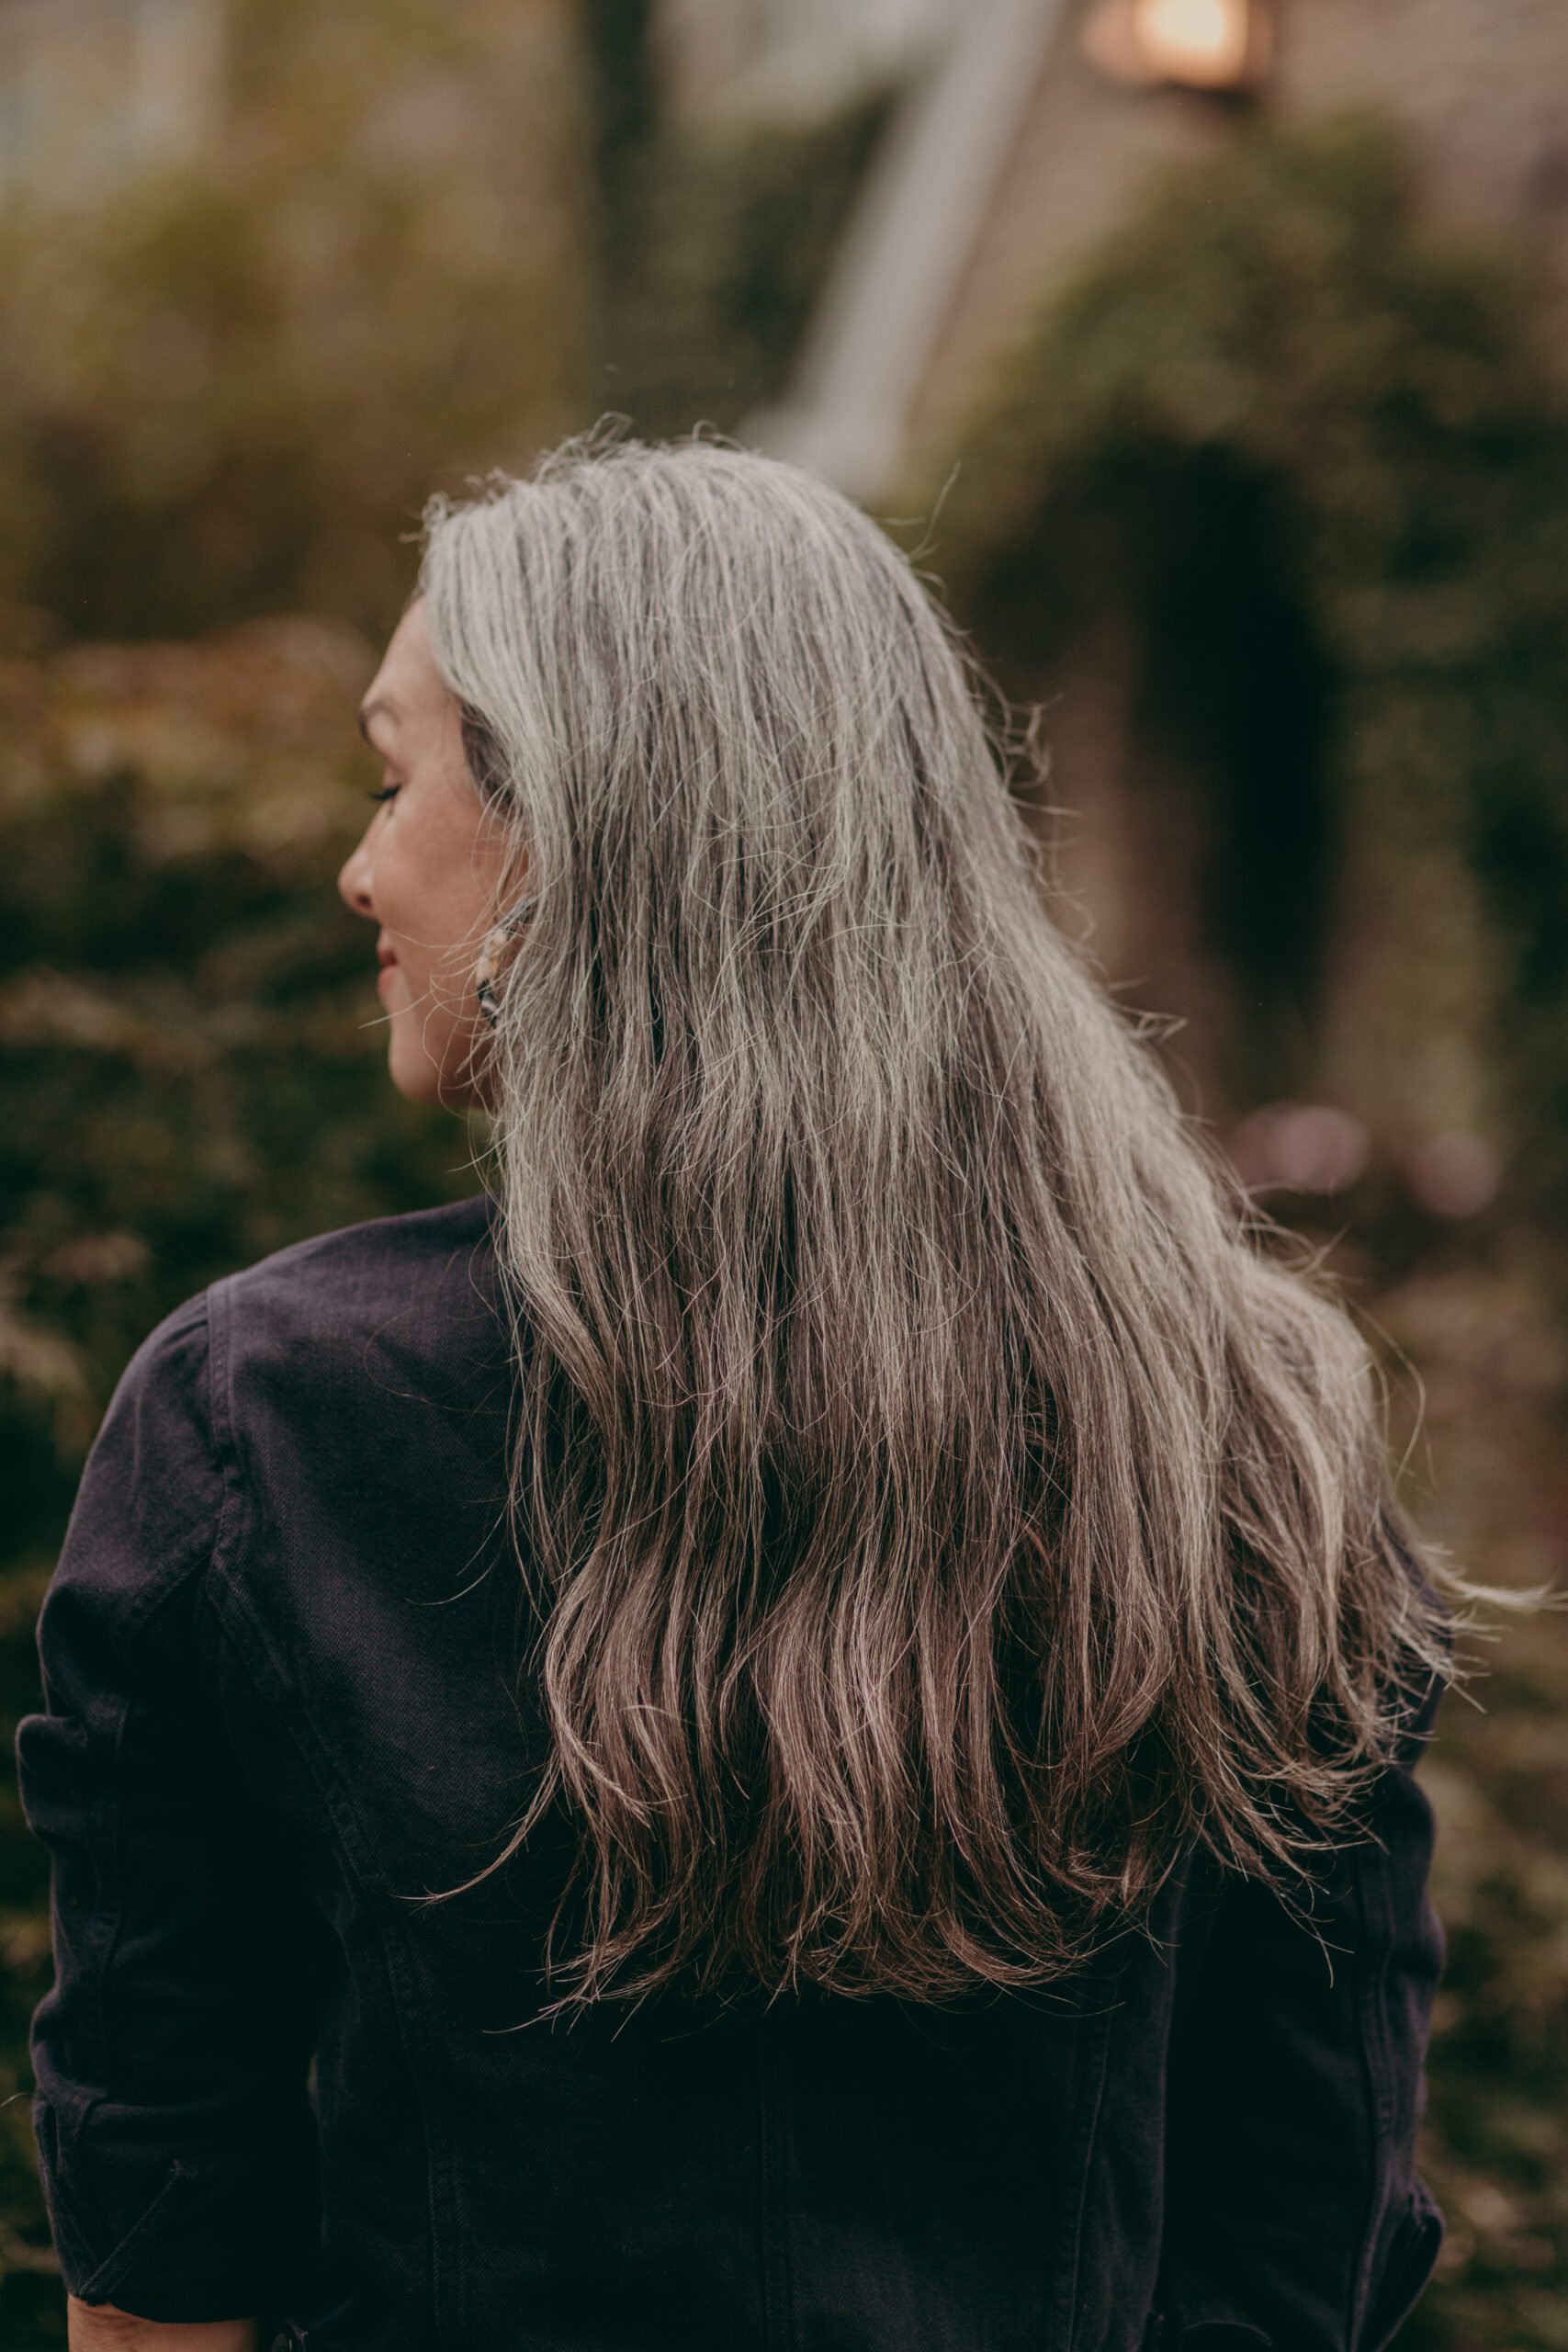 The back of a woman with long wavy gray hair's head.